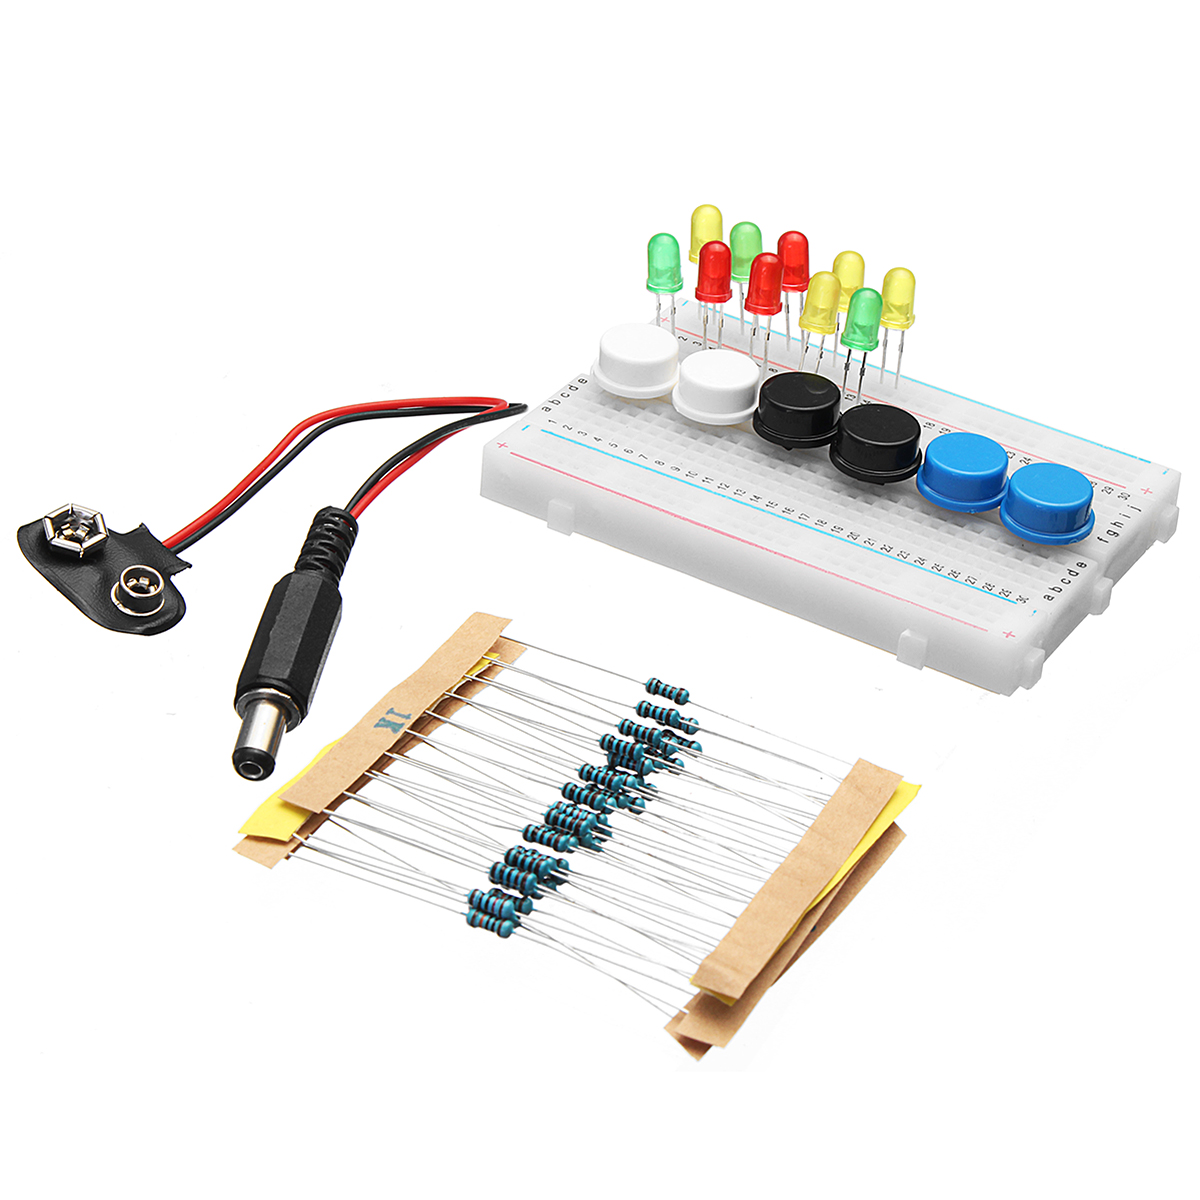 Basic-Starter-Kit-UNO-R3-Mini-Breadboard-LED-Jumper-Wire-Button-With-Box-For-Geekcreit-for-Arduino---1161006